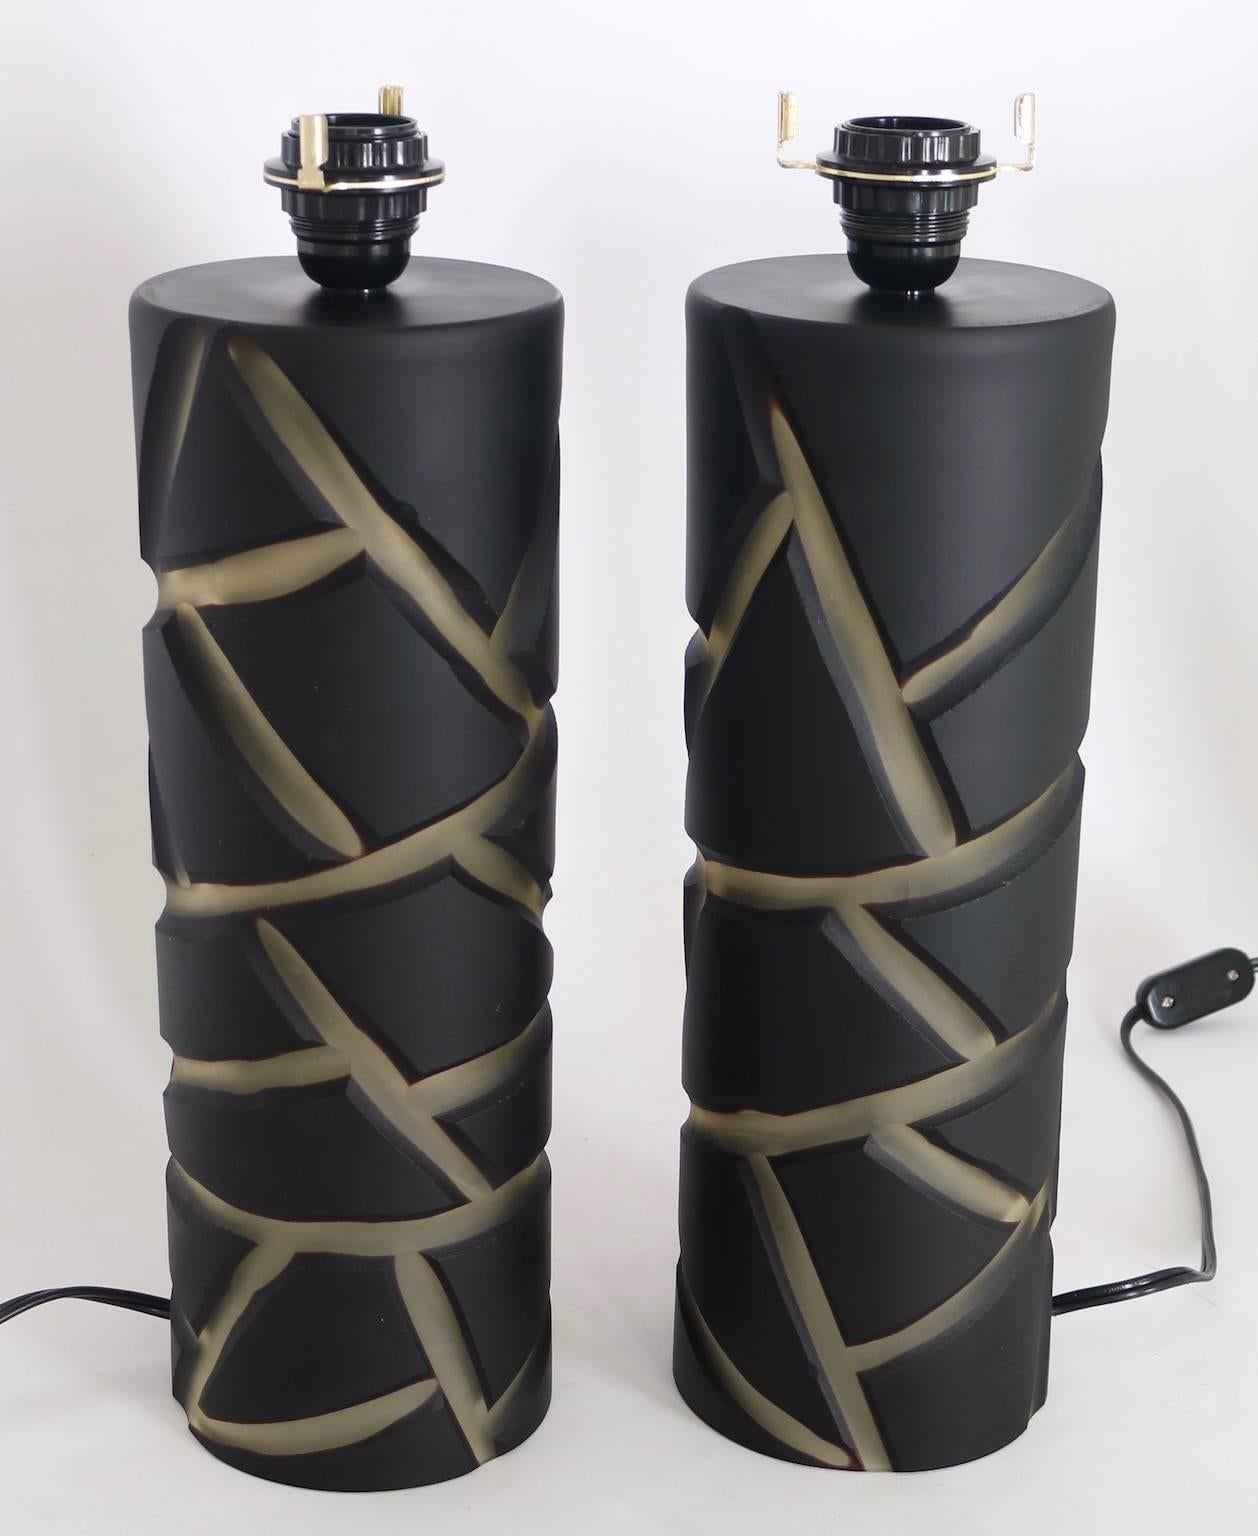 Vivarini table lamps in Murano glass for Formia. Cylindrical in black and clear glass deep cut into giraffe pattern. The pair are signed and dated on the top. Silk paper shades included. These lamps have never been used and are in excellent